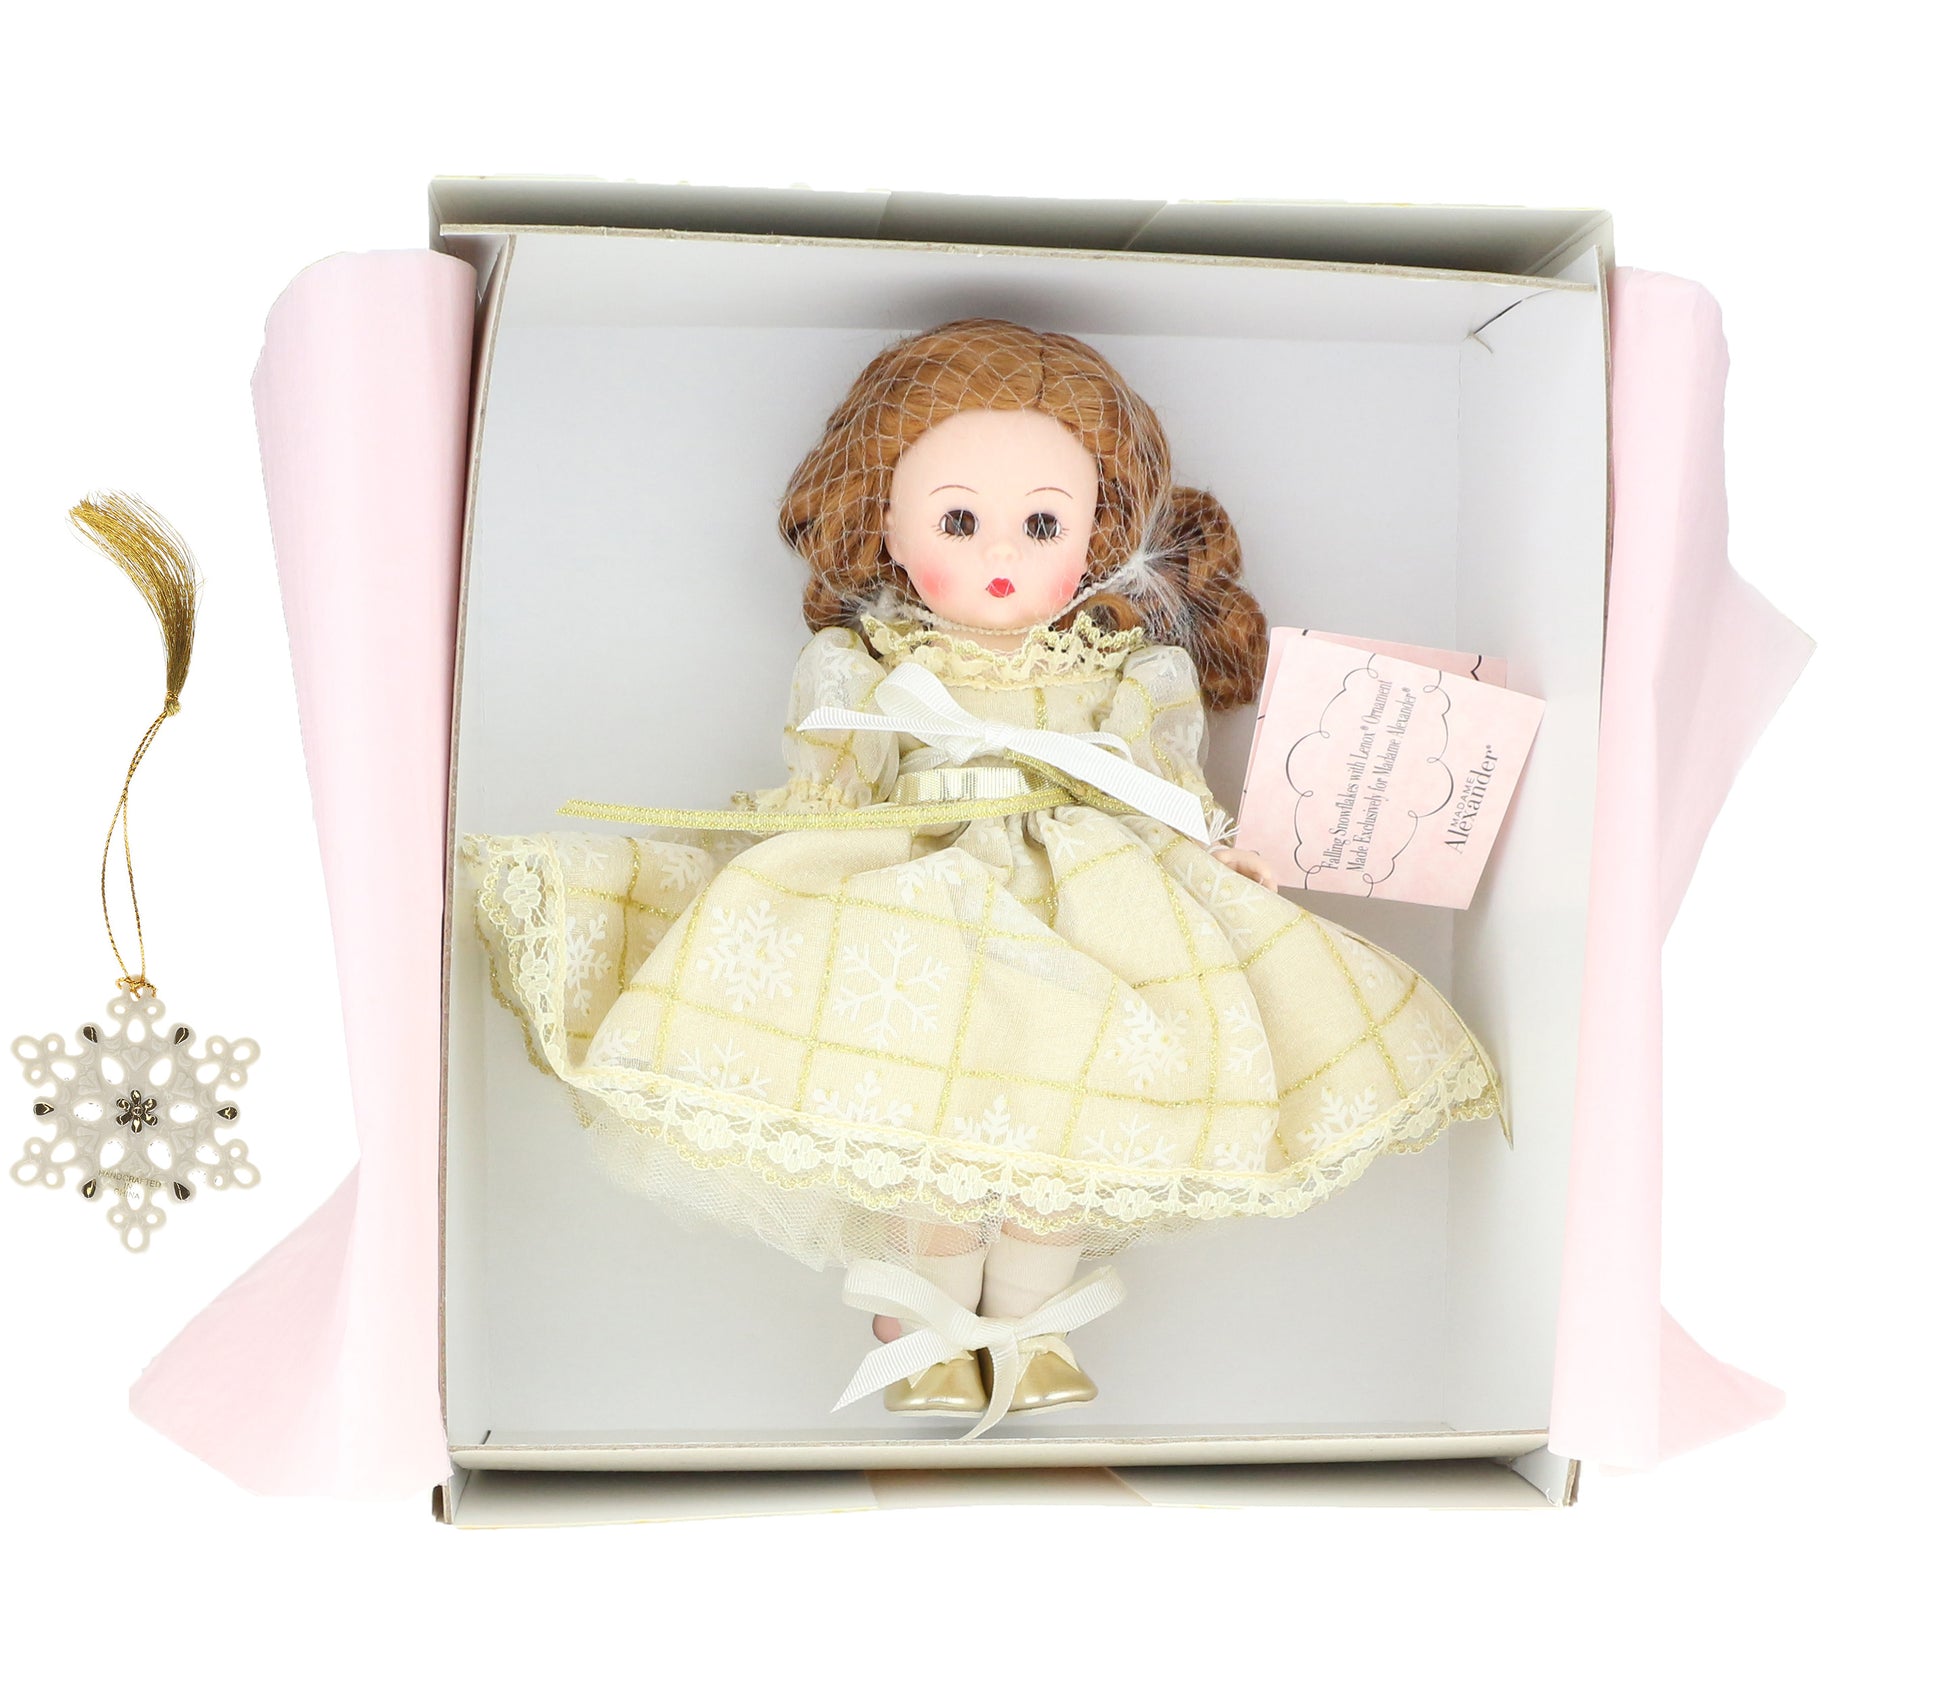 40050 Falling Snowflakes With Lenox Ornament Doll In Box With Collectible Ornament